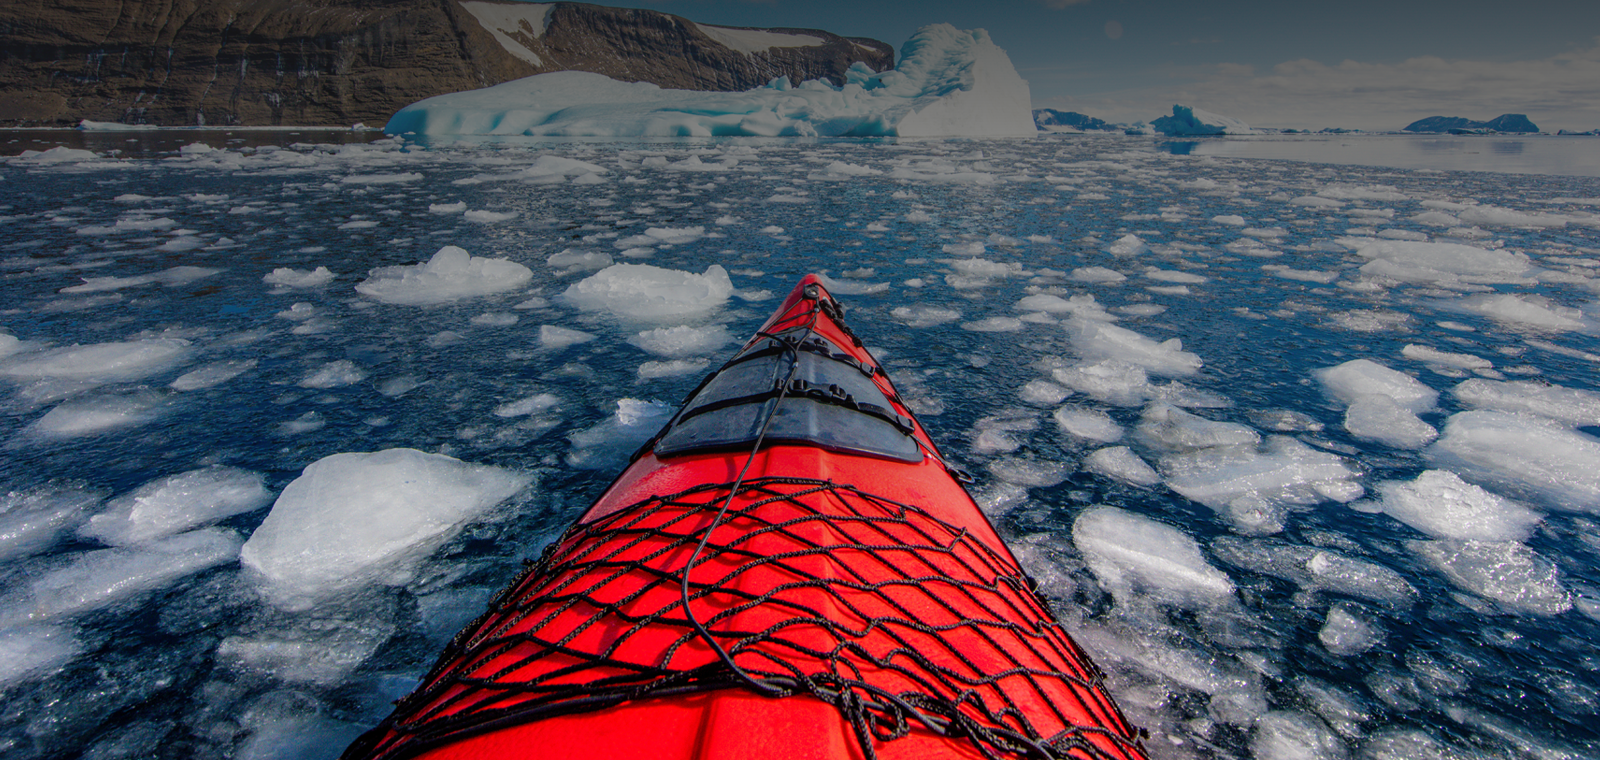 Forward view from the seat of a red kayak navigating an arctic sea full of floating chunks of ice.